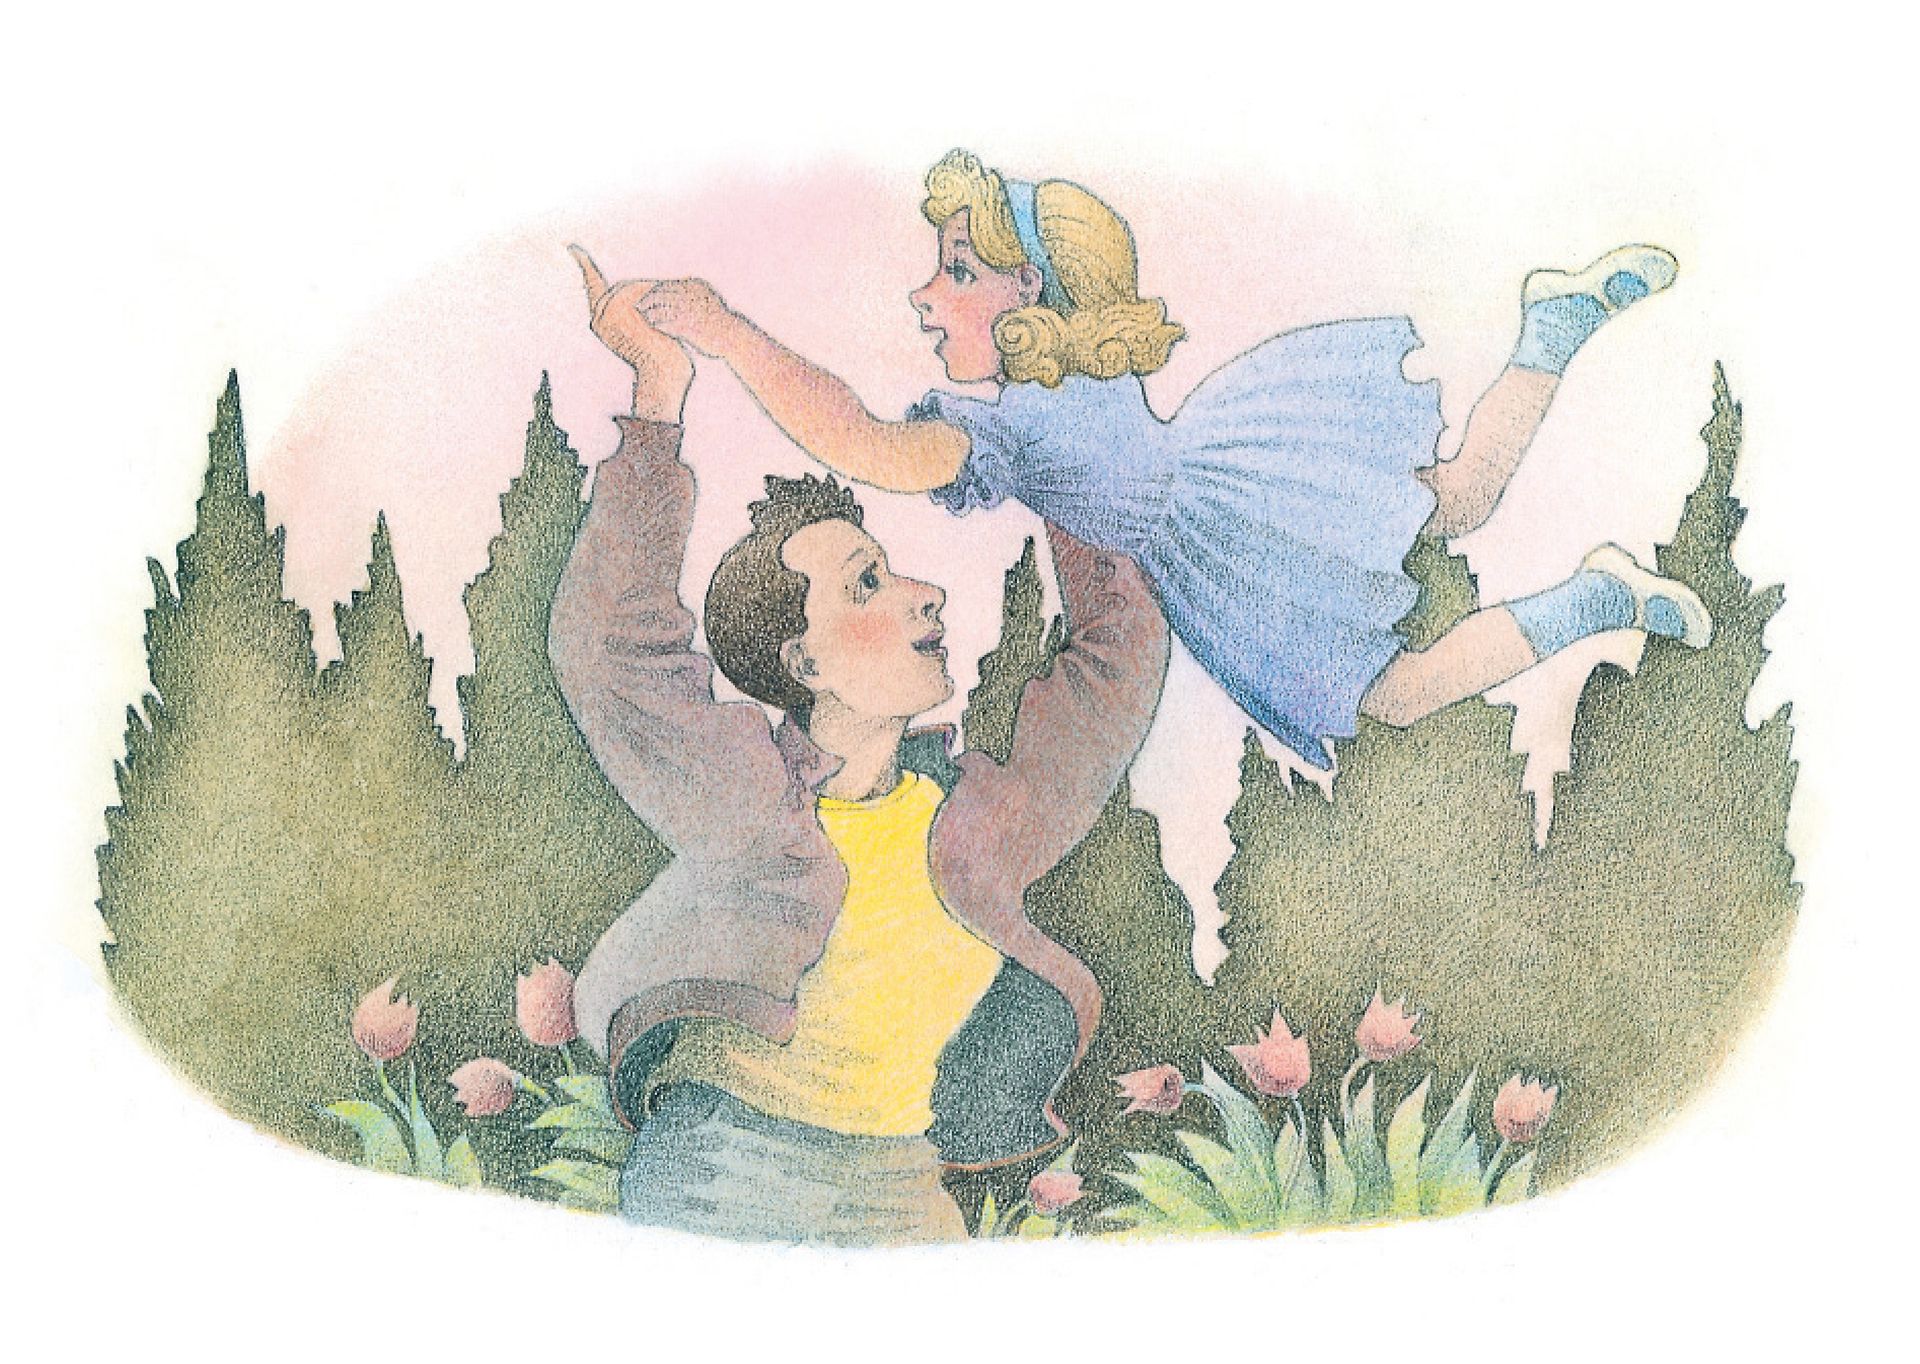 A father playfully tossing his daughter into the air. From the Children’s Songbook, page 210, “Daddy’s Homecoming”; watercolor illustration by Richard Hull.